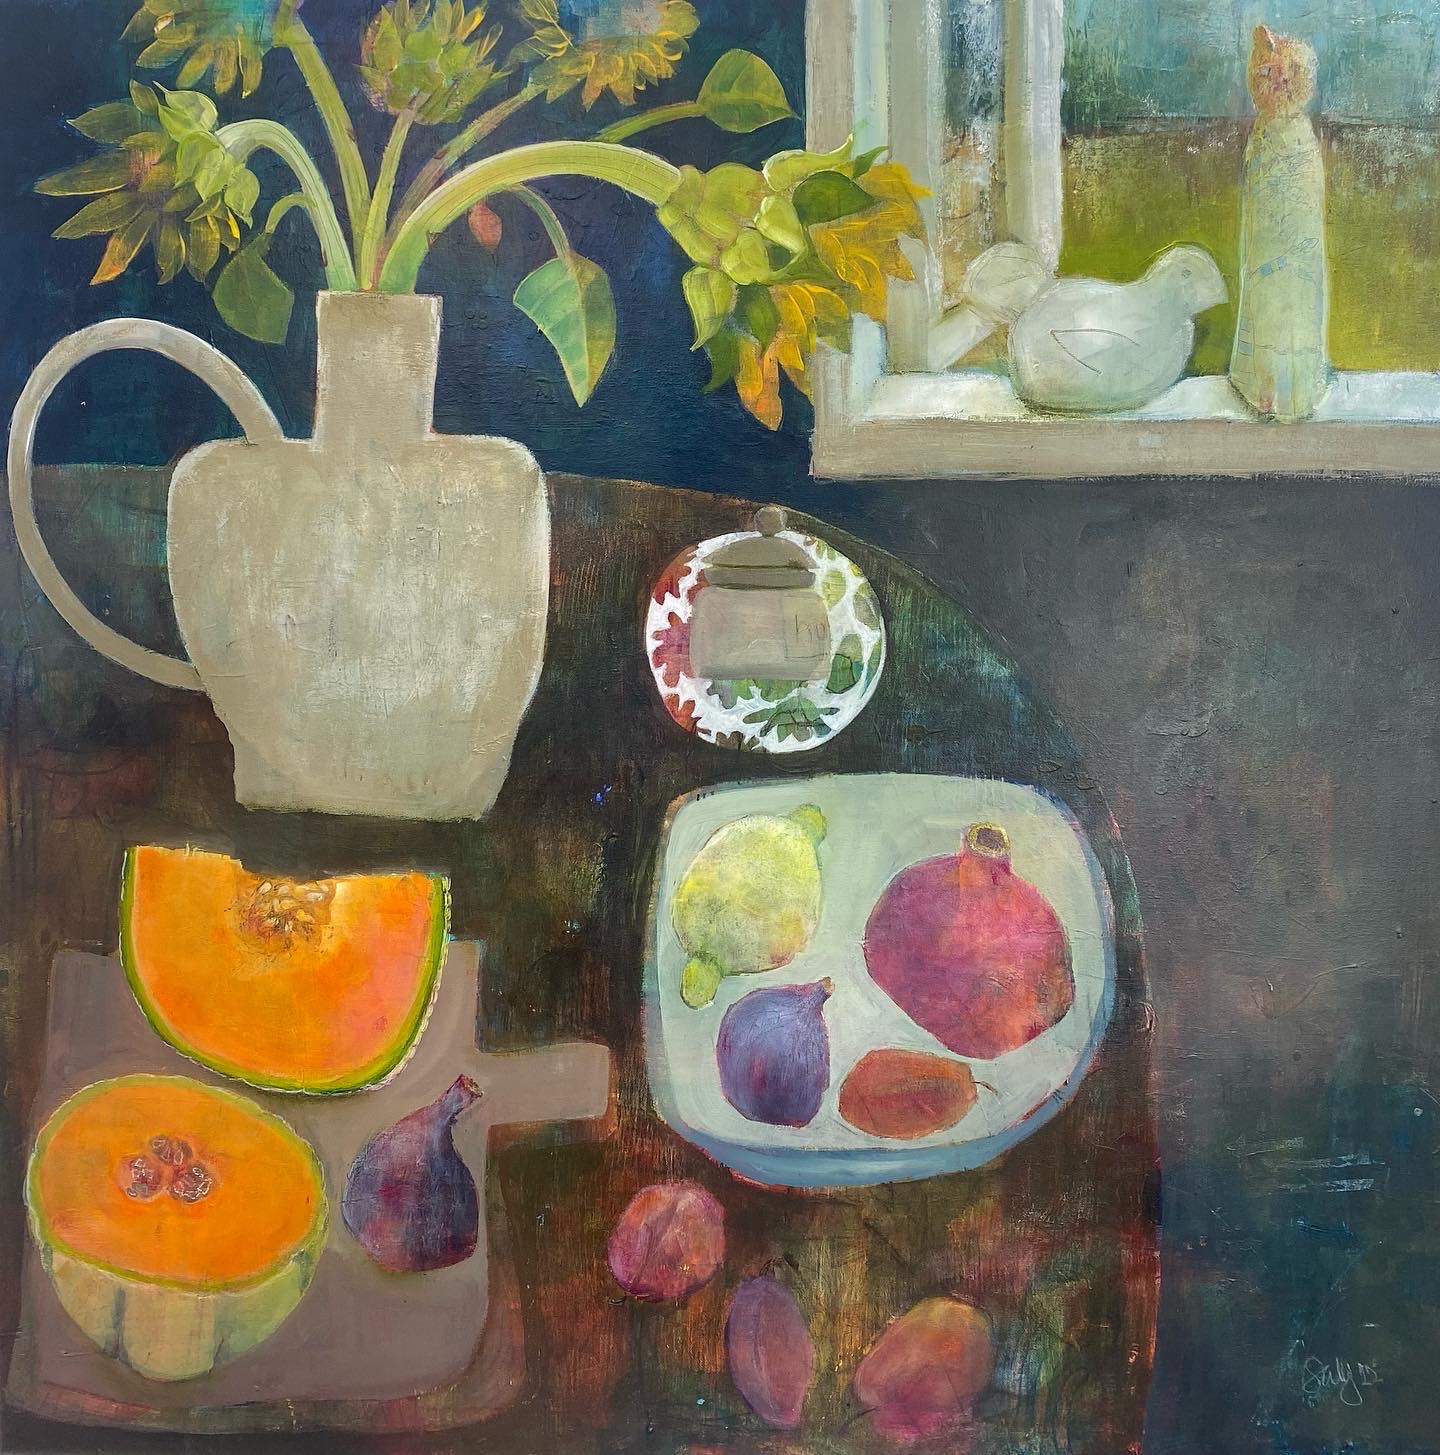 Painting of a still life